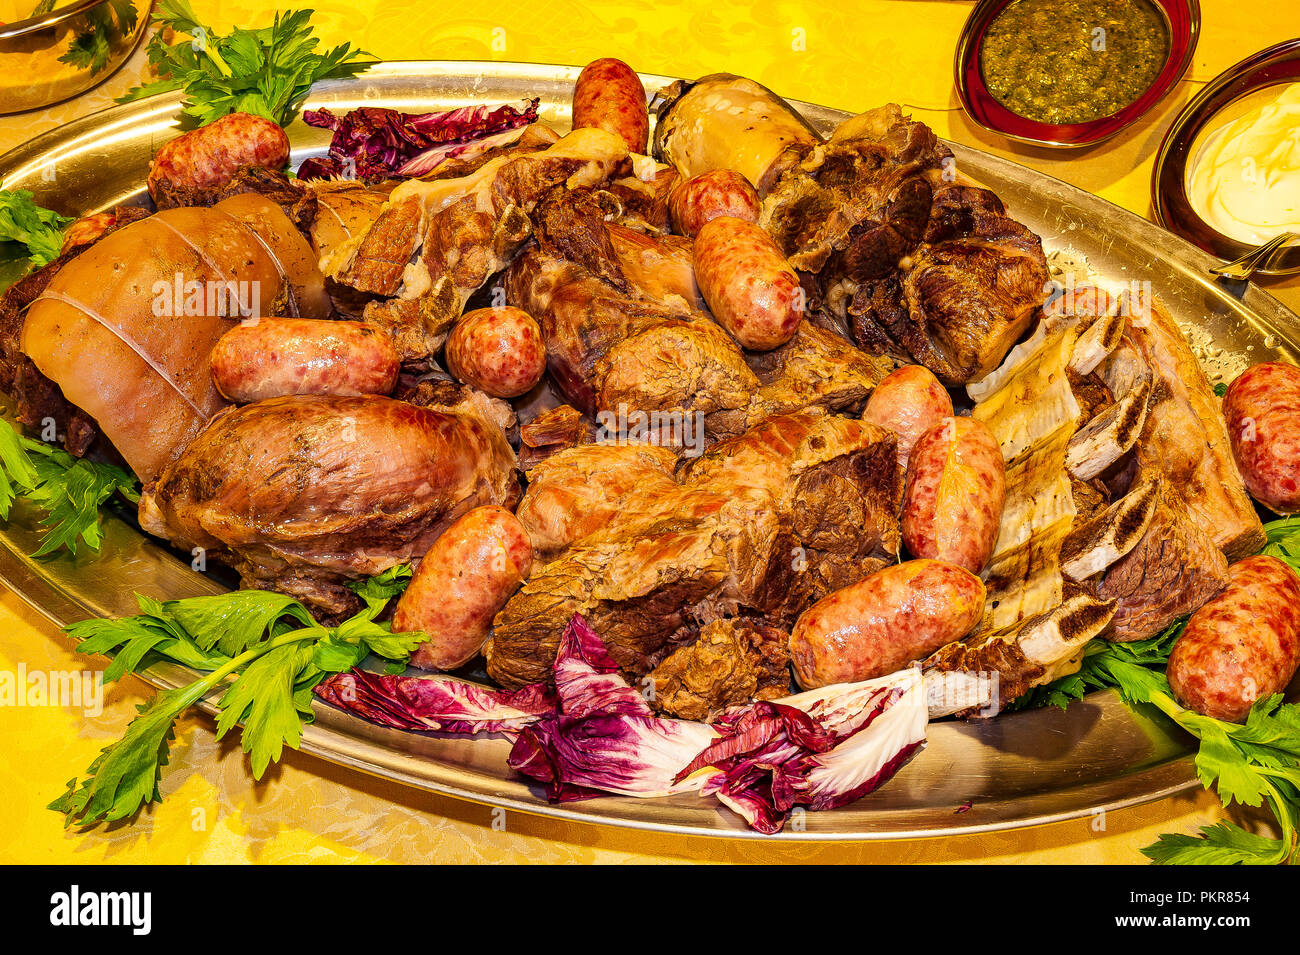 Italy Piedmont -typical dish - Boiled alla Piemontese with various types of meat selected Stock Photo